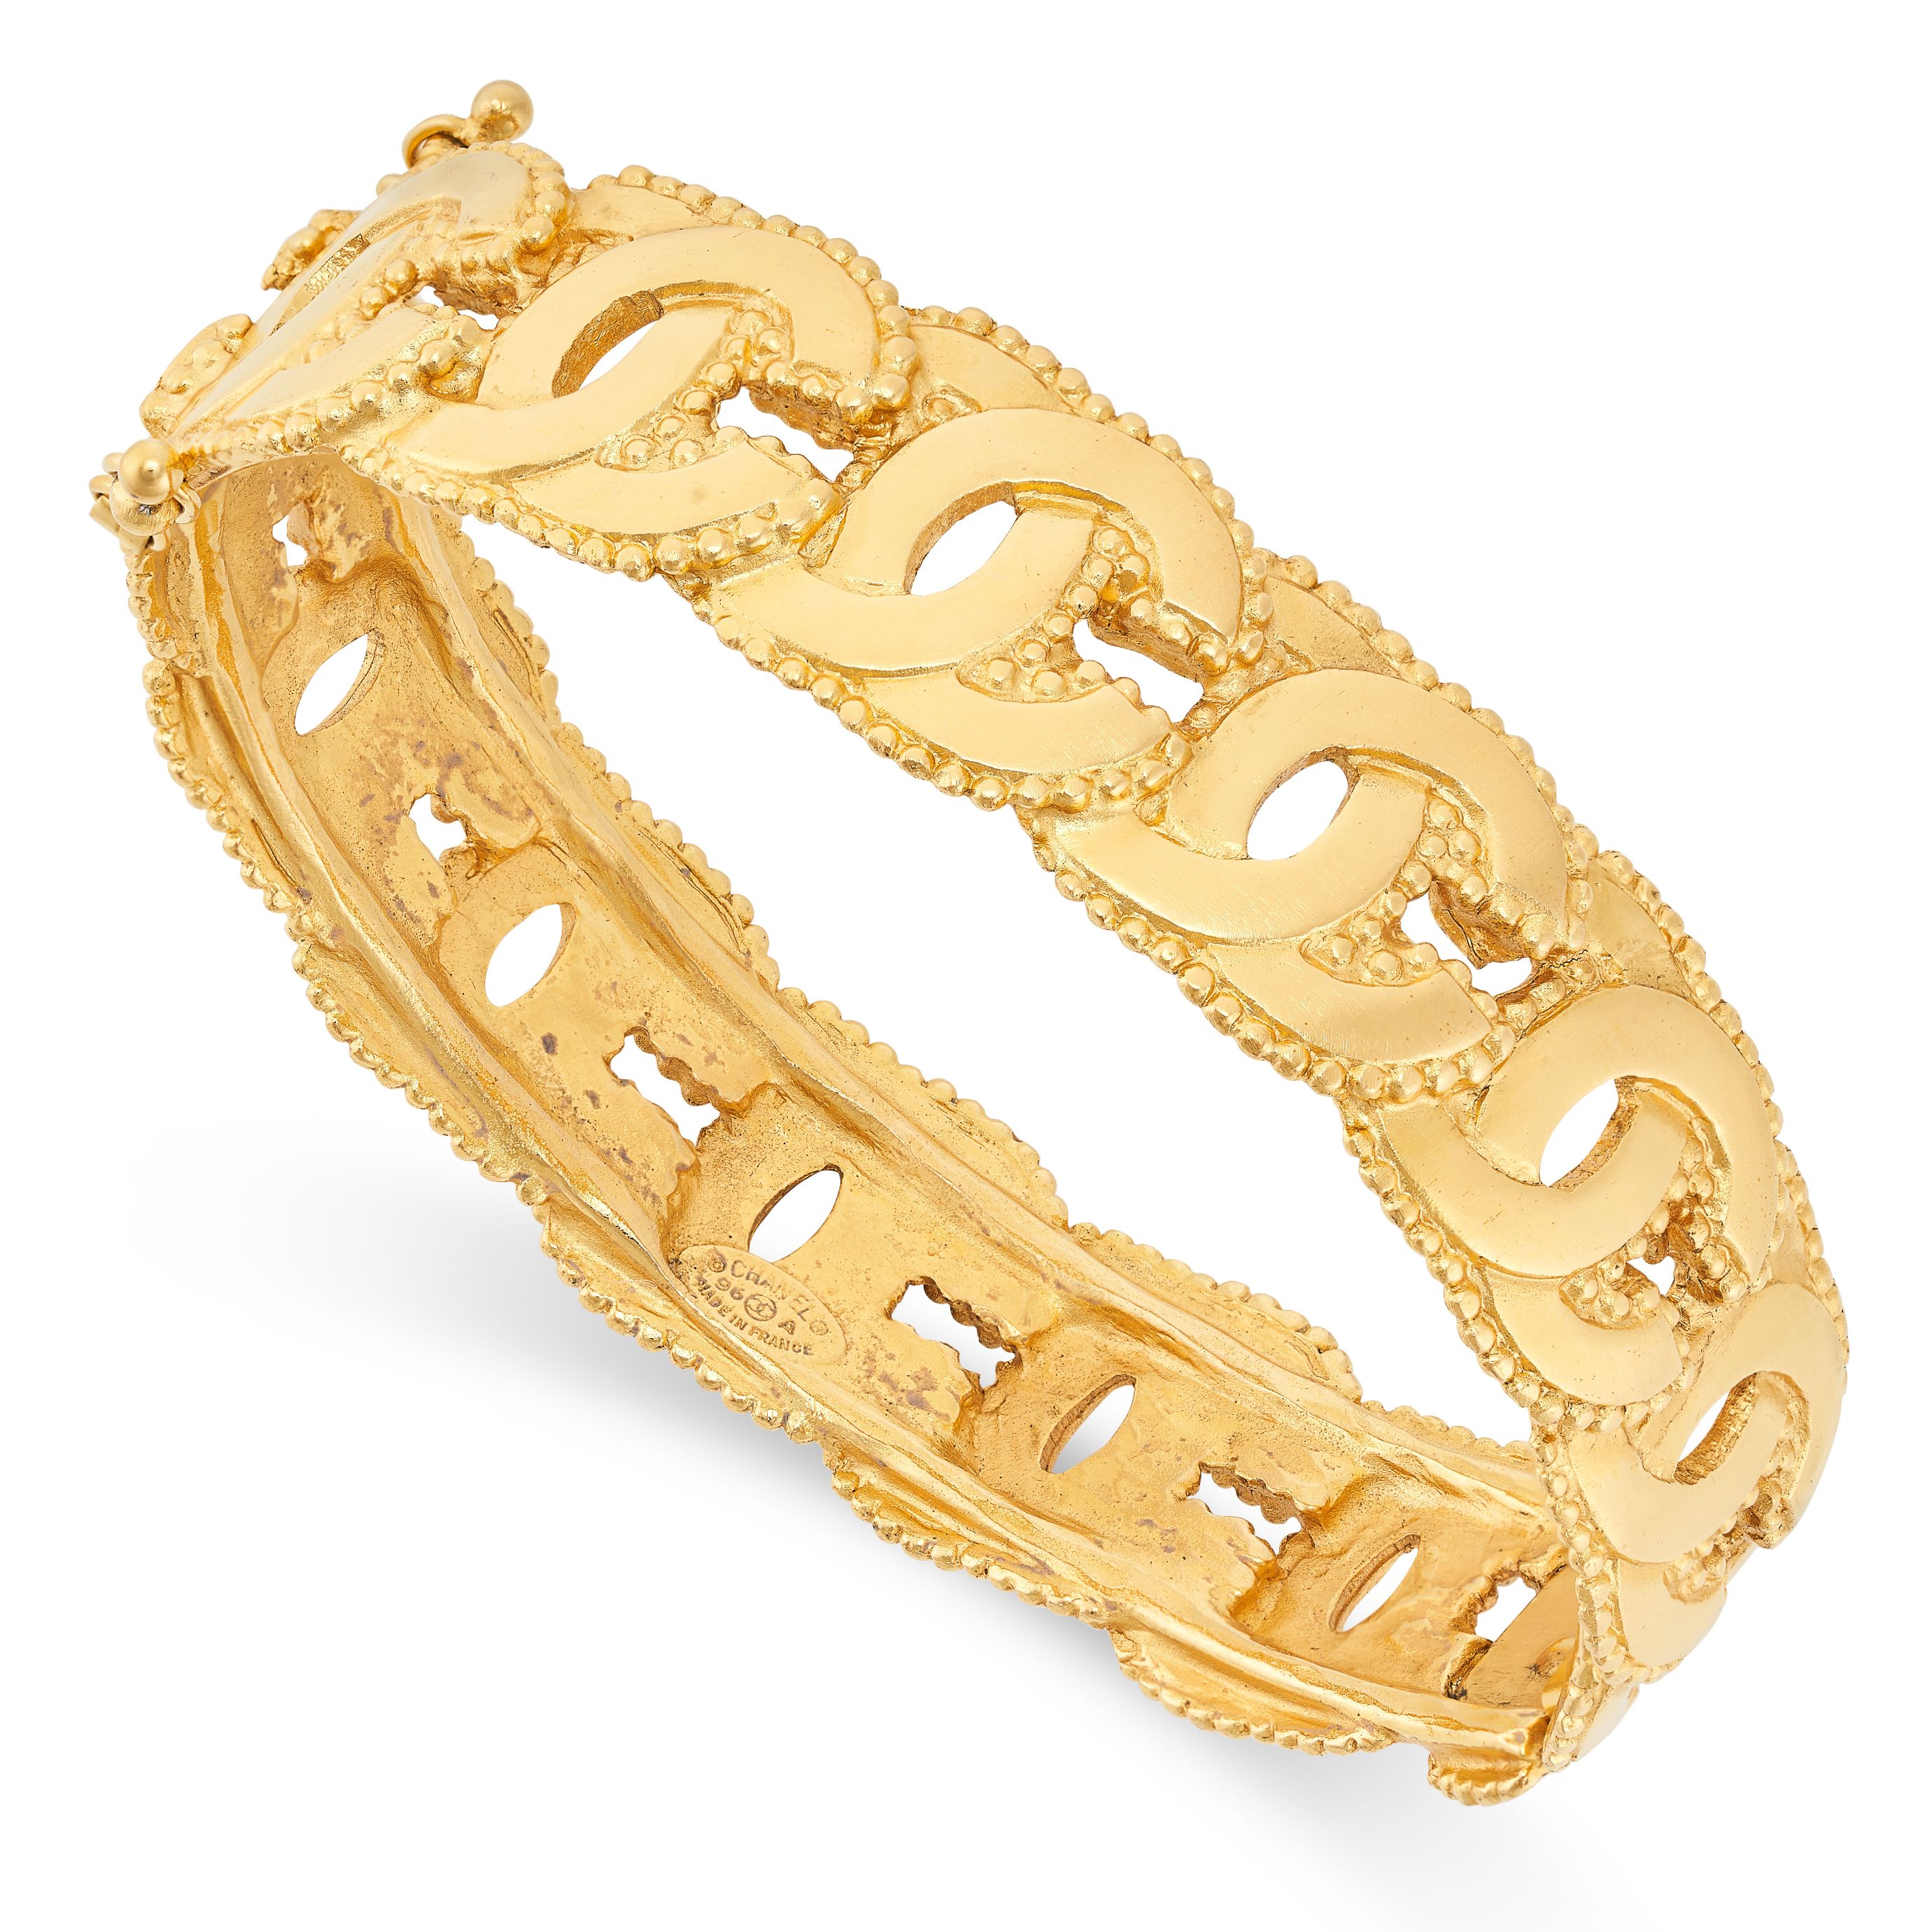 CHANEL, A VINTAGE CC BANGLE the bangle comprising a series of interlocking C motifs with beaded